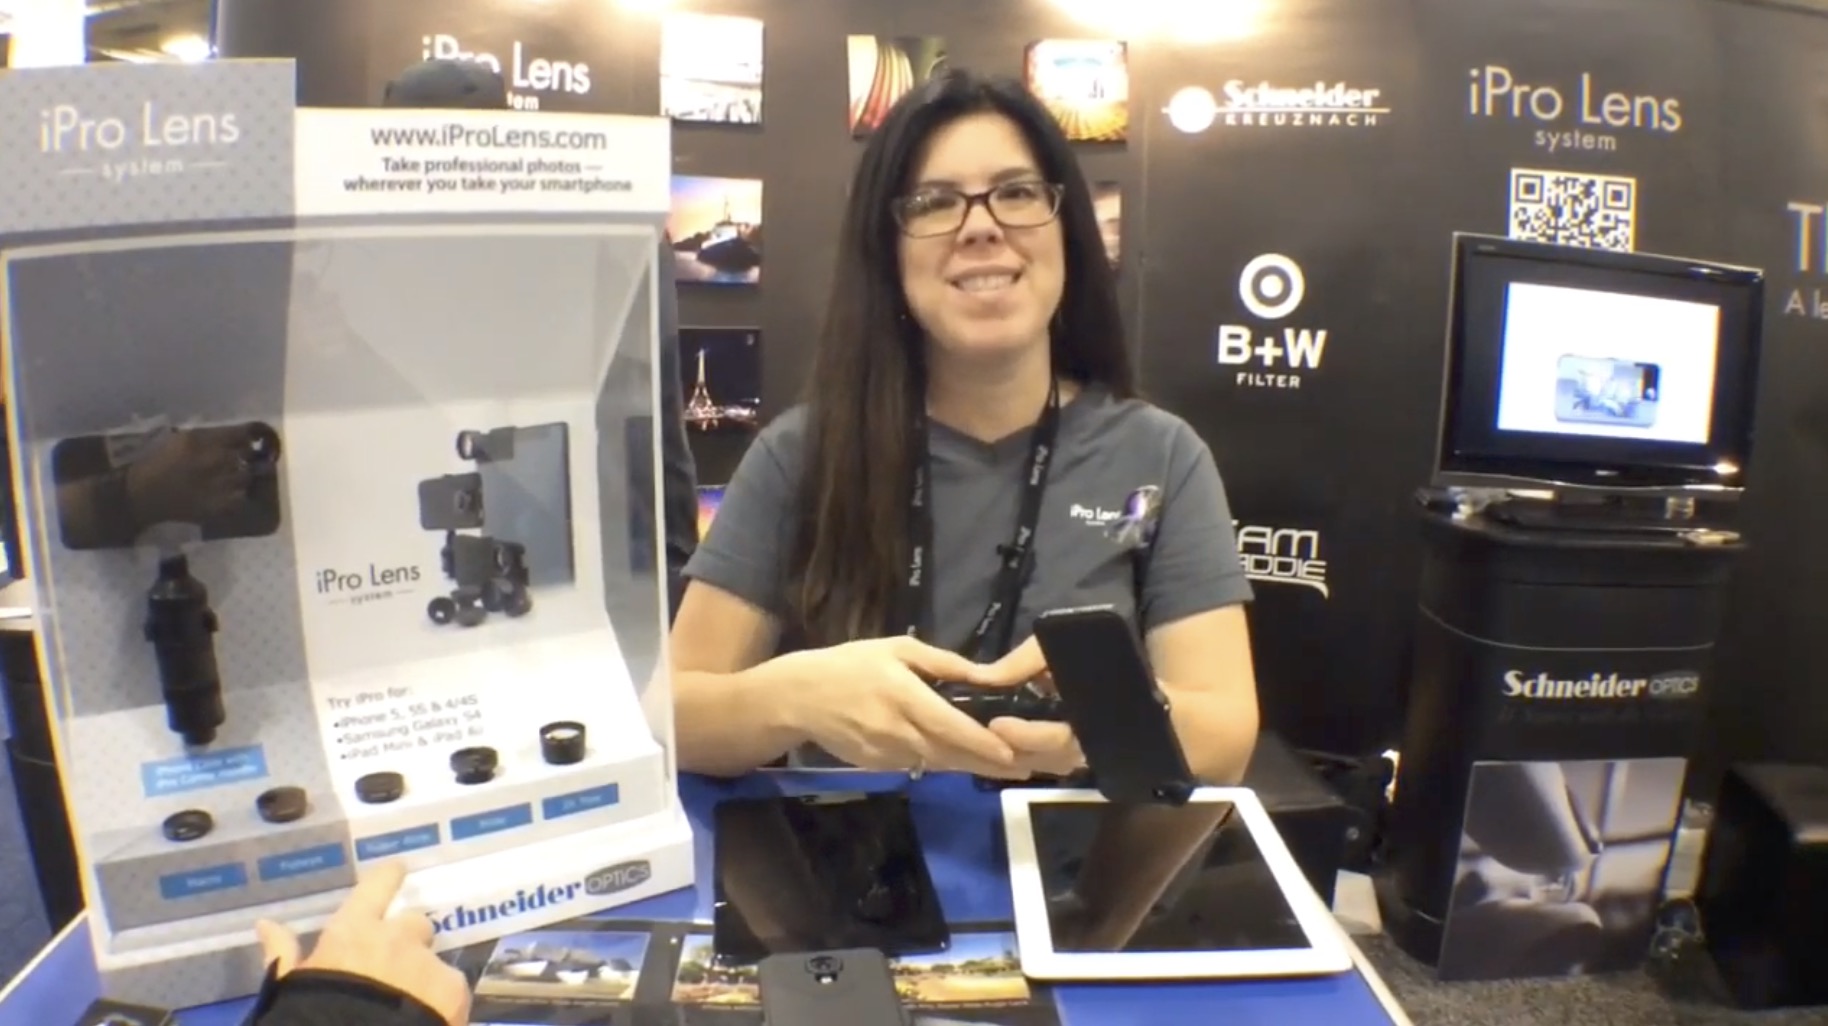 A smiling woman demonstrating a Samsung mobile photography lens at a trade booth.